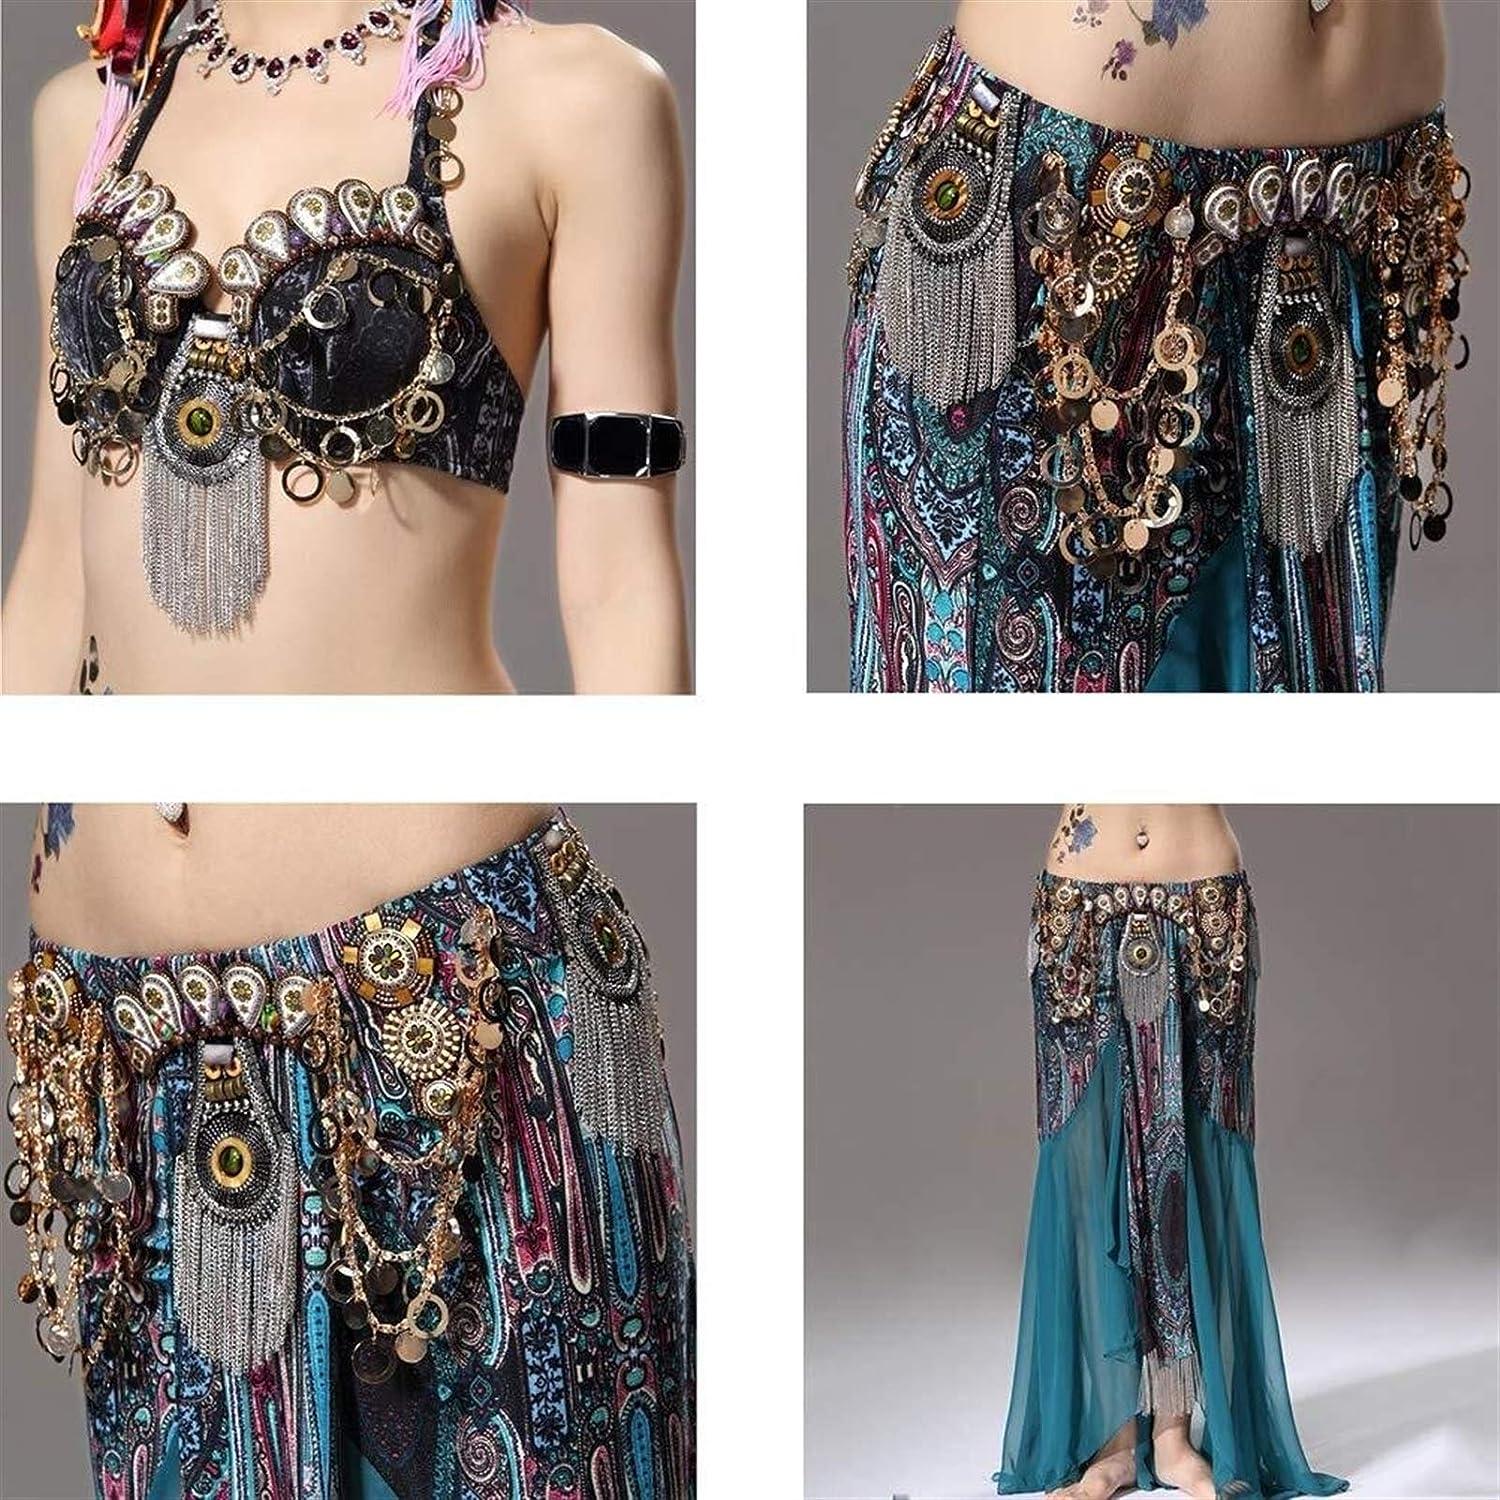 Belly Dancing Outfit, B Dance Practice Dress, Skirt Belly Dance Costume  Tribal Costume Set Belly Dance Practice Costume Skirt Medium Green